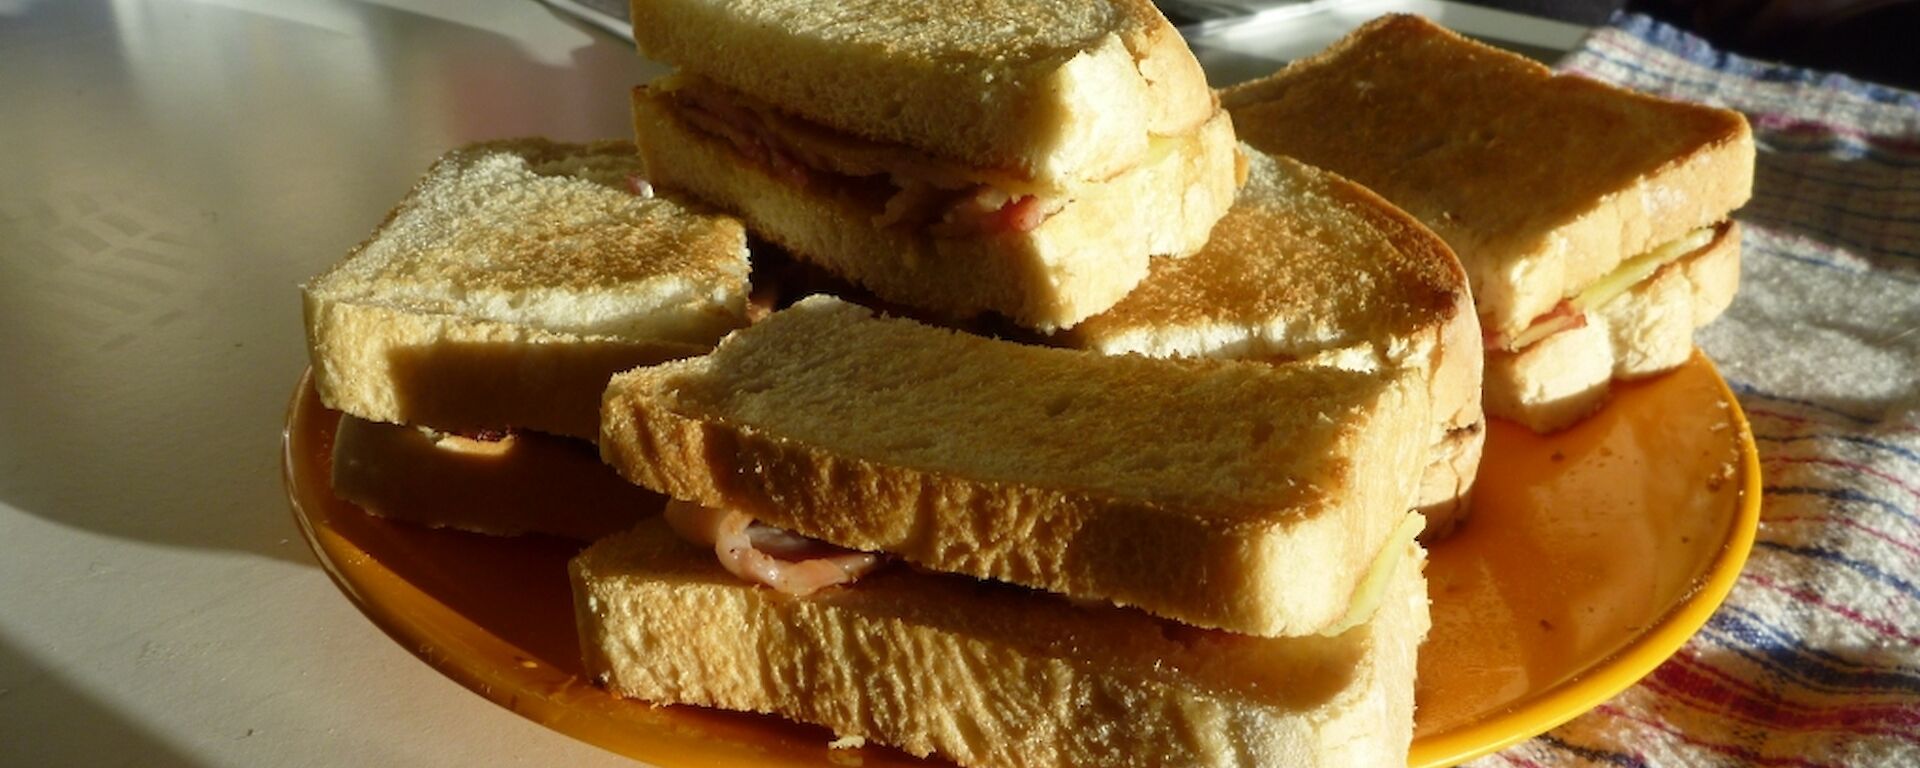 A plate of toasted bacon and cheese sandwiches